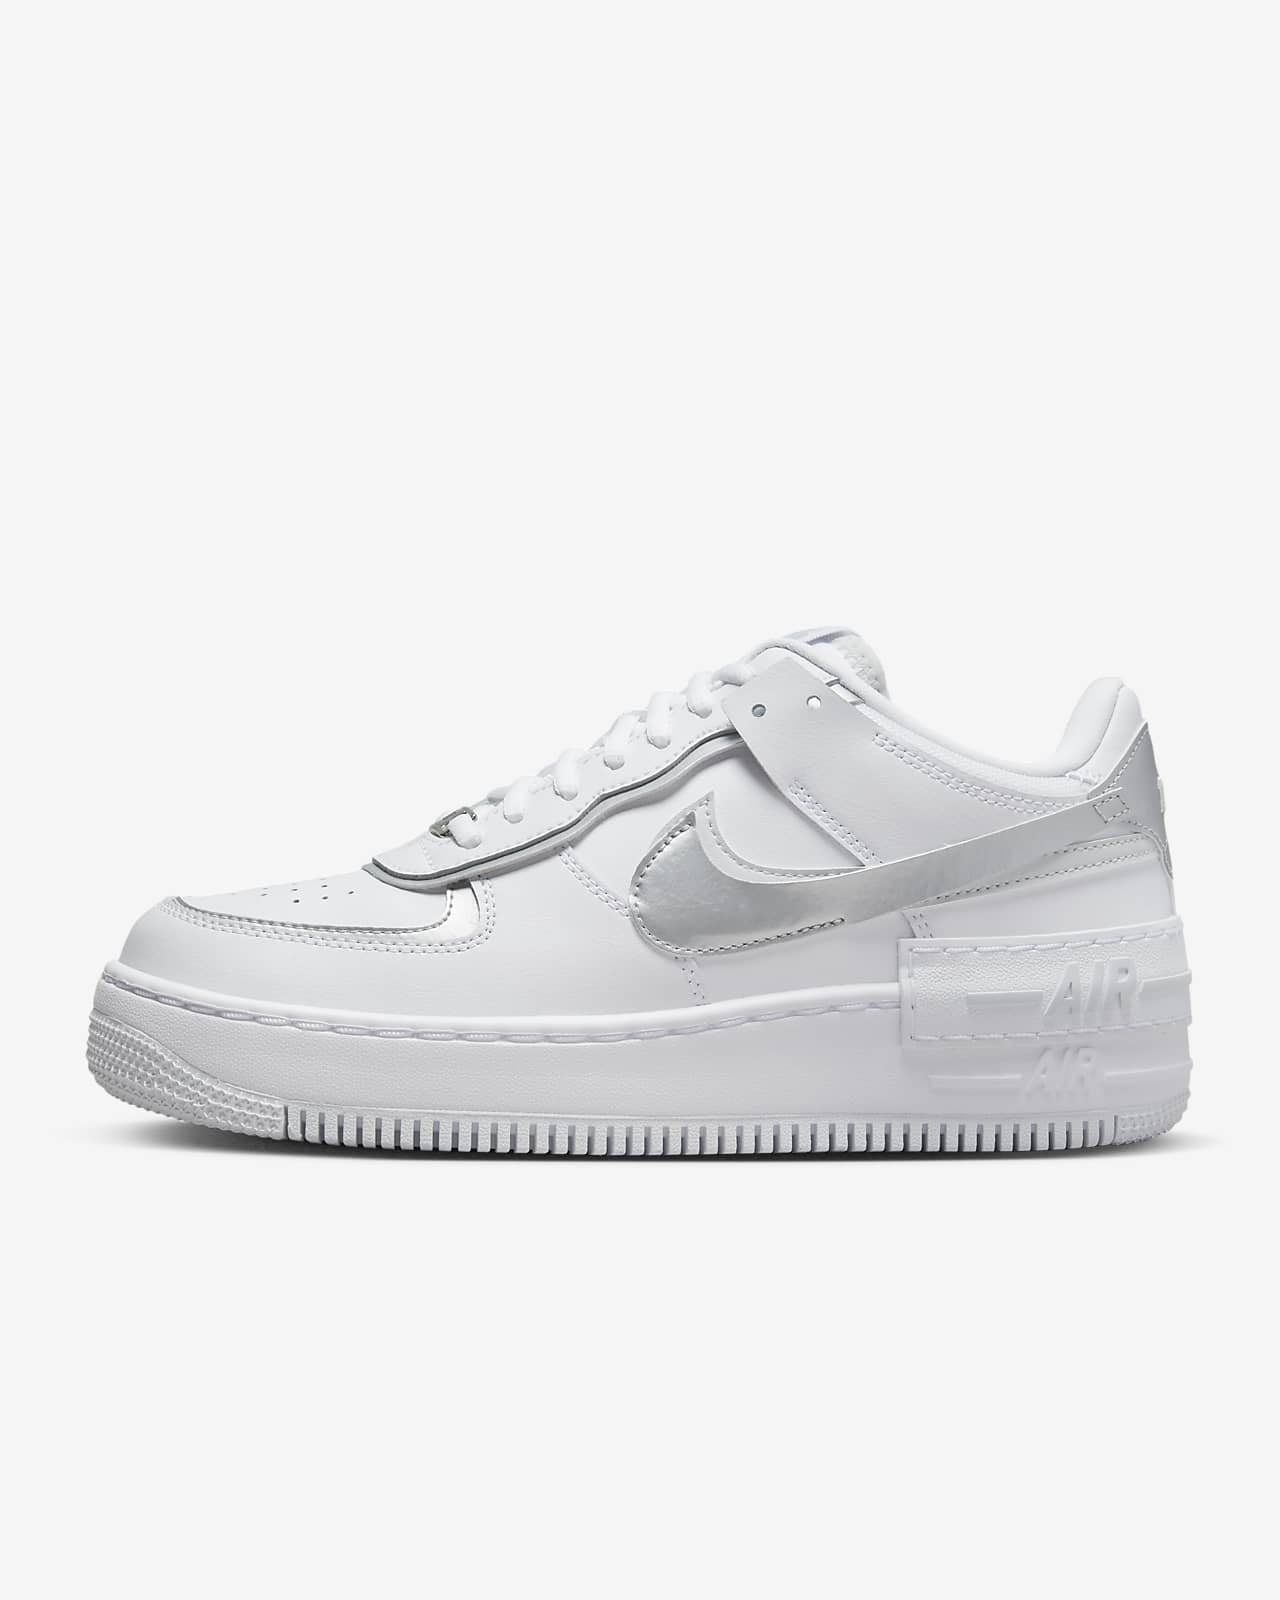 the nike air force 1 shadow